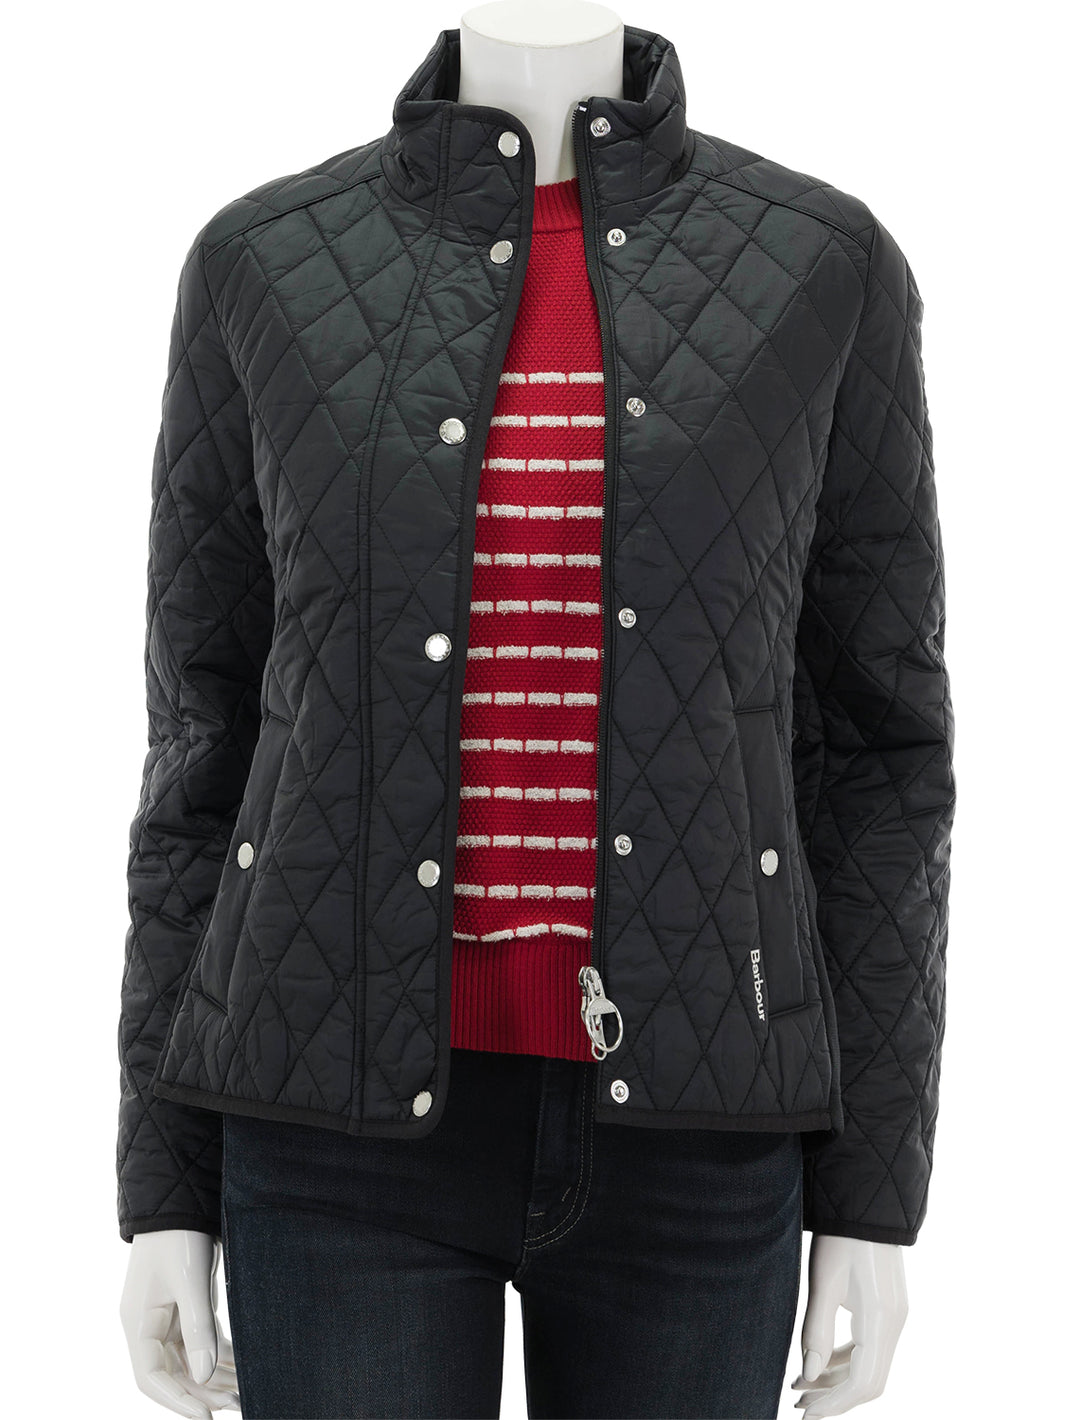 Front view of Barbour's yarrow quilted jacket in black, unzipped.